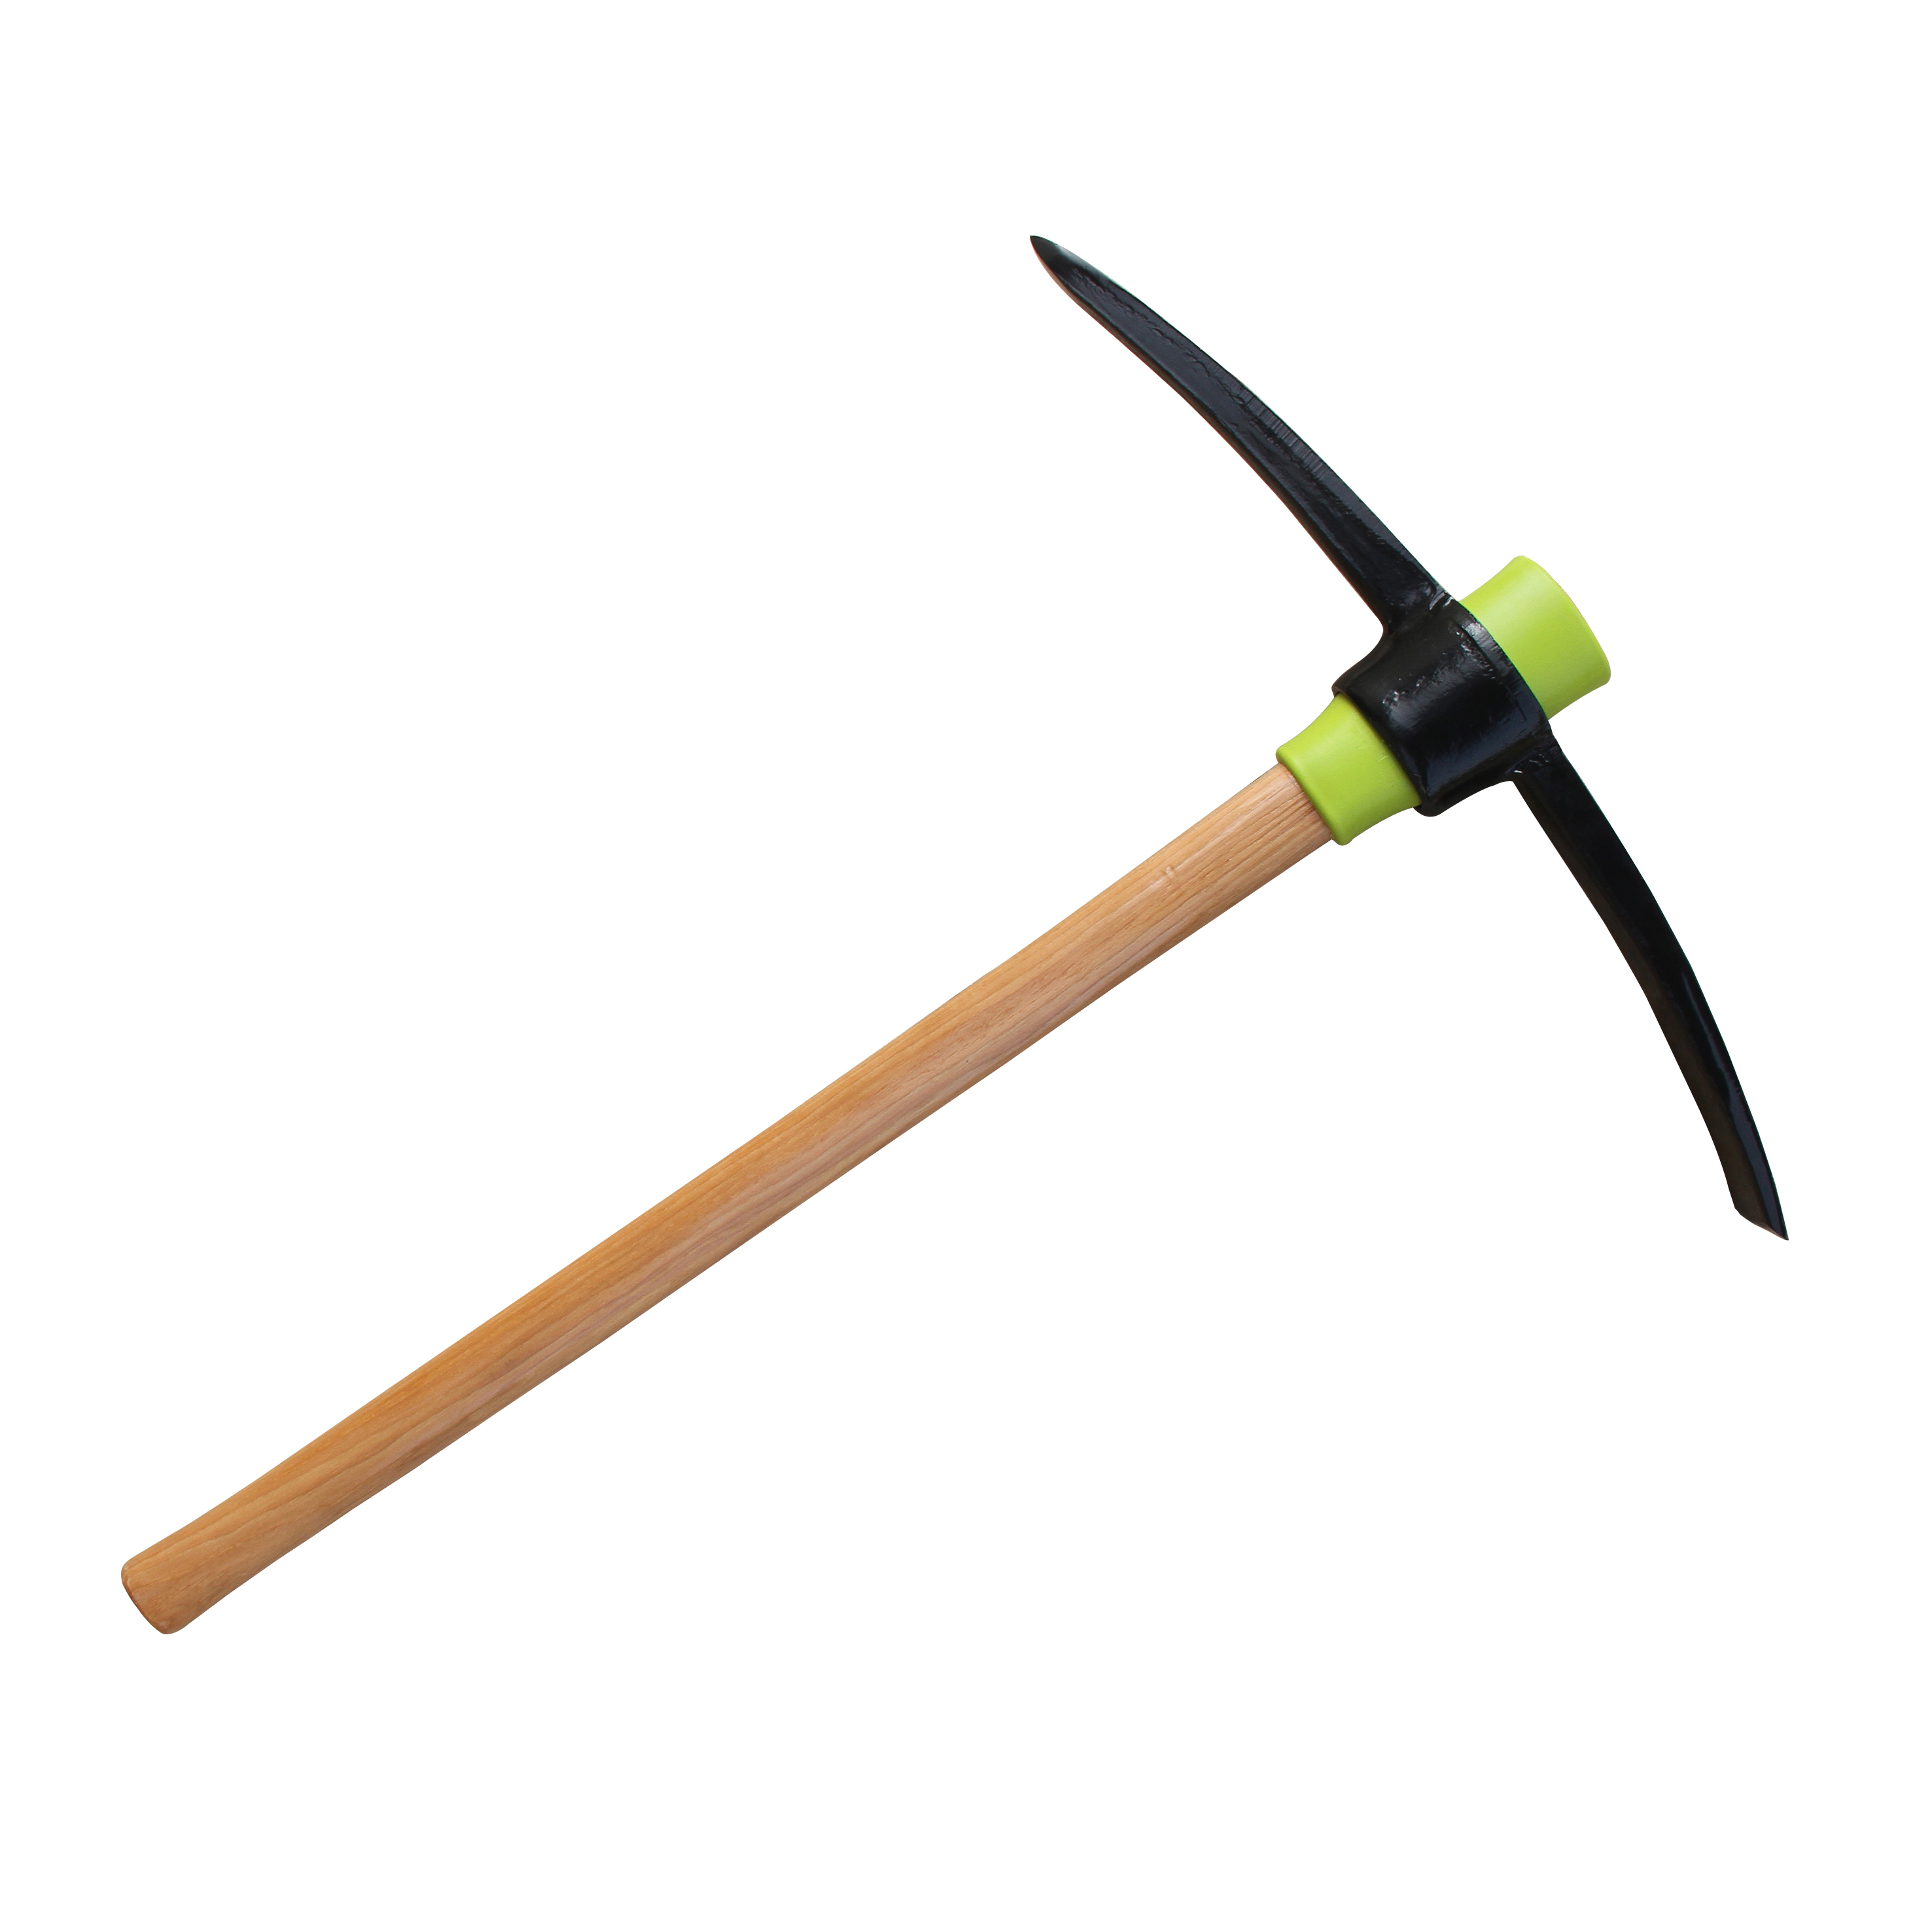 P413 3.2KG Pickaxe with hickory handle